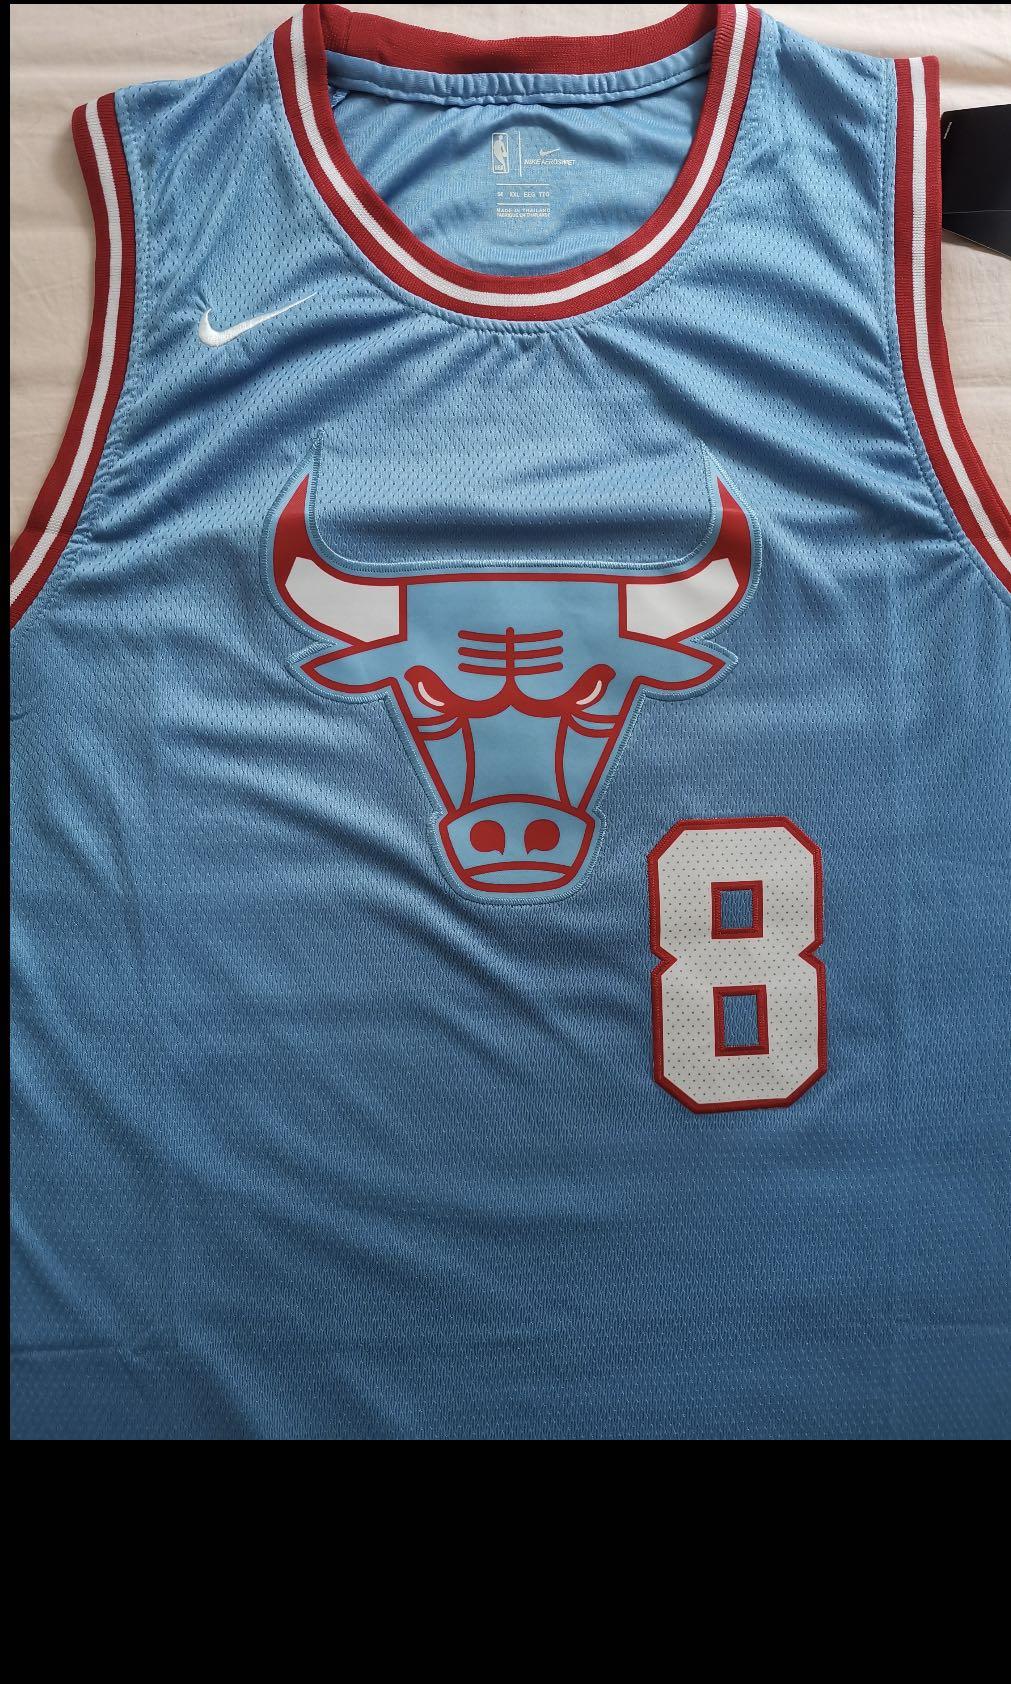 Nike NBA Chicago Bull City Edition Jersey(Size XL)Dead Stock